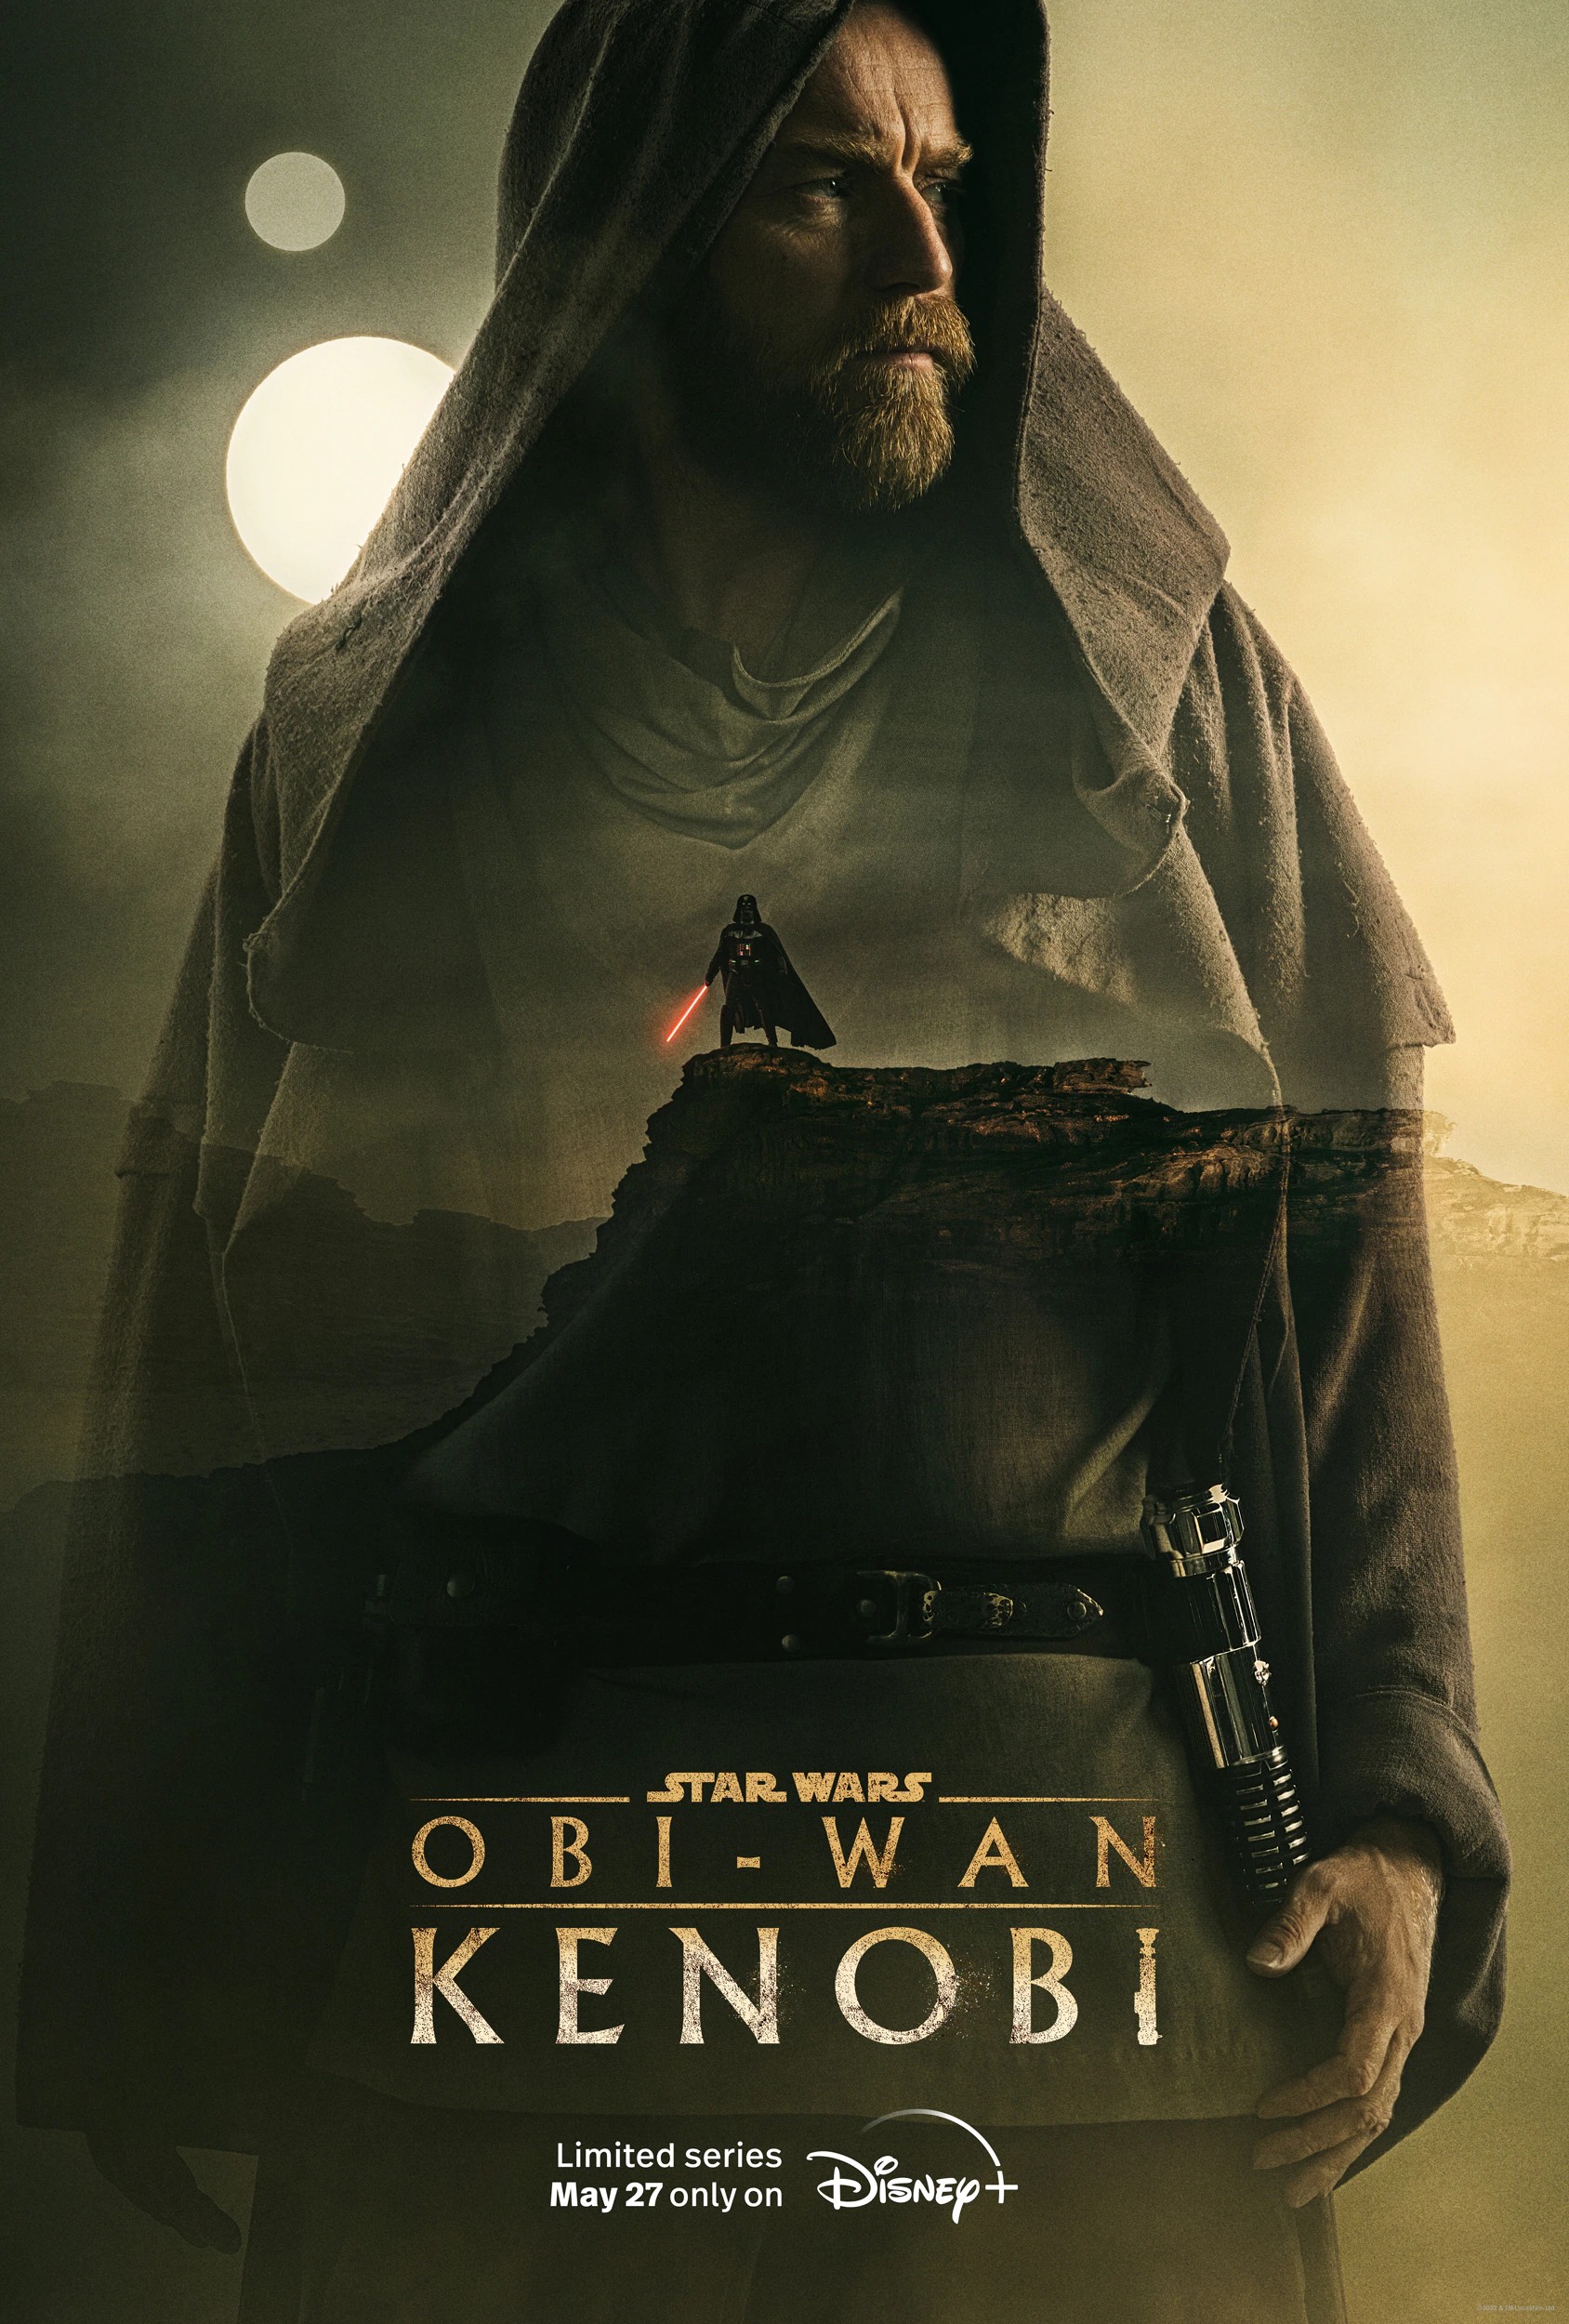 Andor' Now Certified Fresh on Rotten Tomatoes - Star Wars News Net